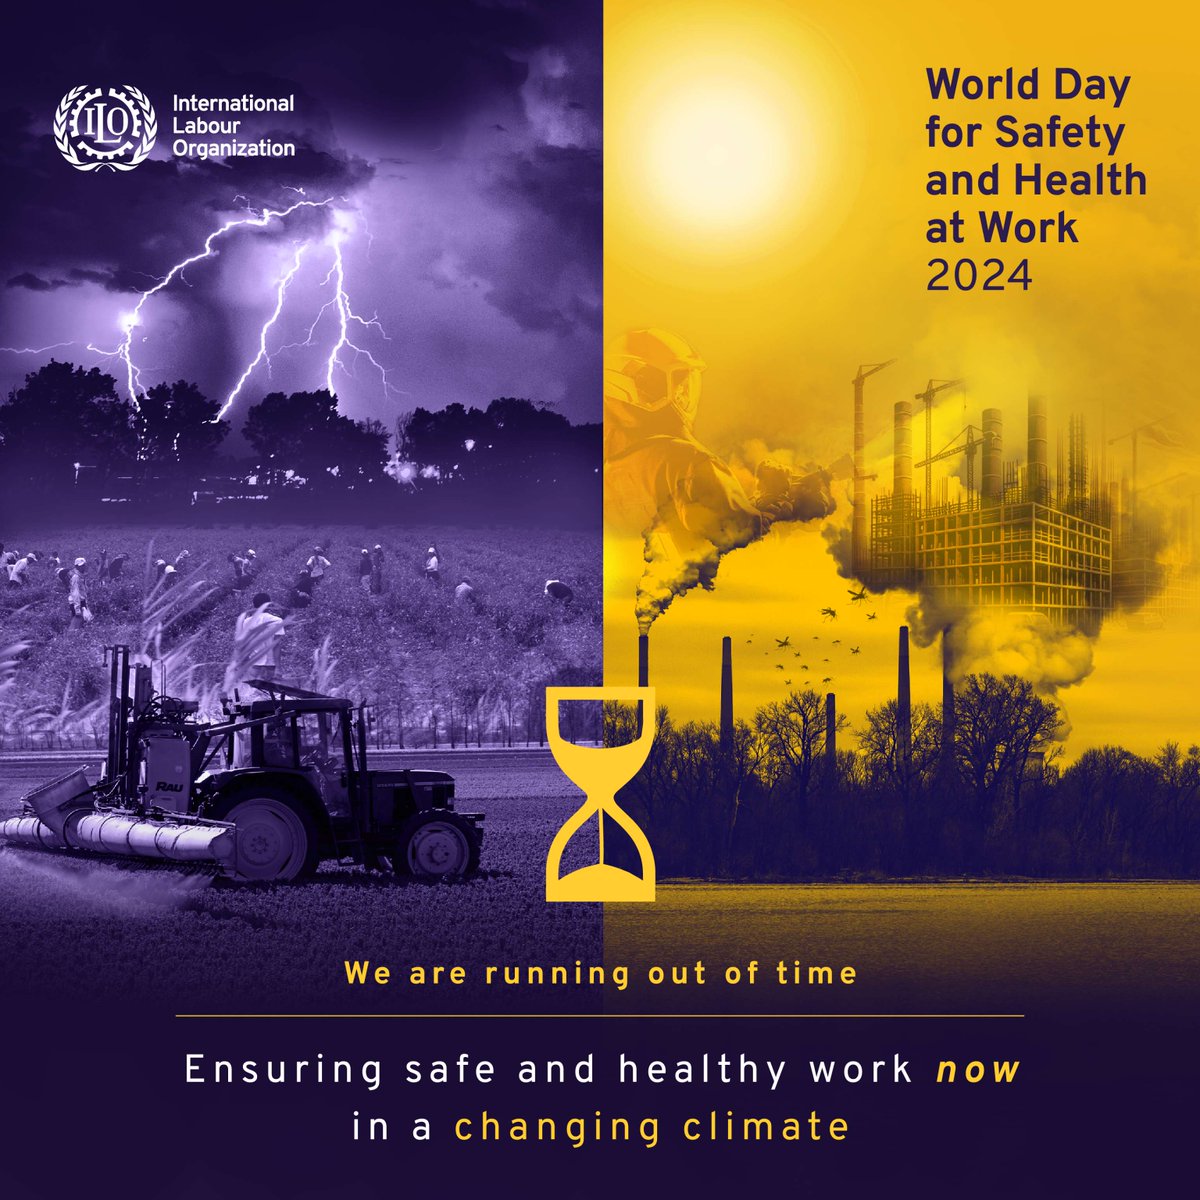 It's World Day for Safety & Health at Work! Today we look at the impact of #ClimateChange on workers' safety & health globally. Women may be at increased risk due to their job roles, such as in subsistence agriculture. Source: @ilo's report unwo.men/Z1Wr50RmbLa #SafeDay2024